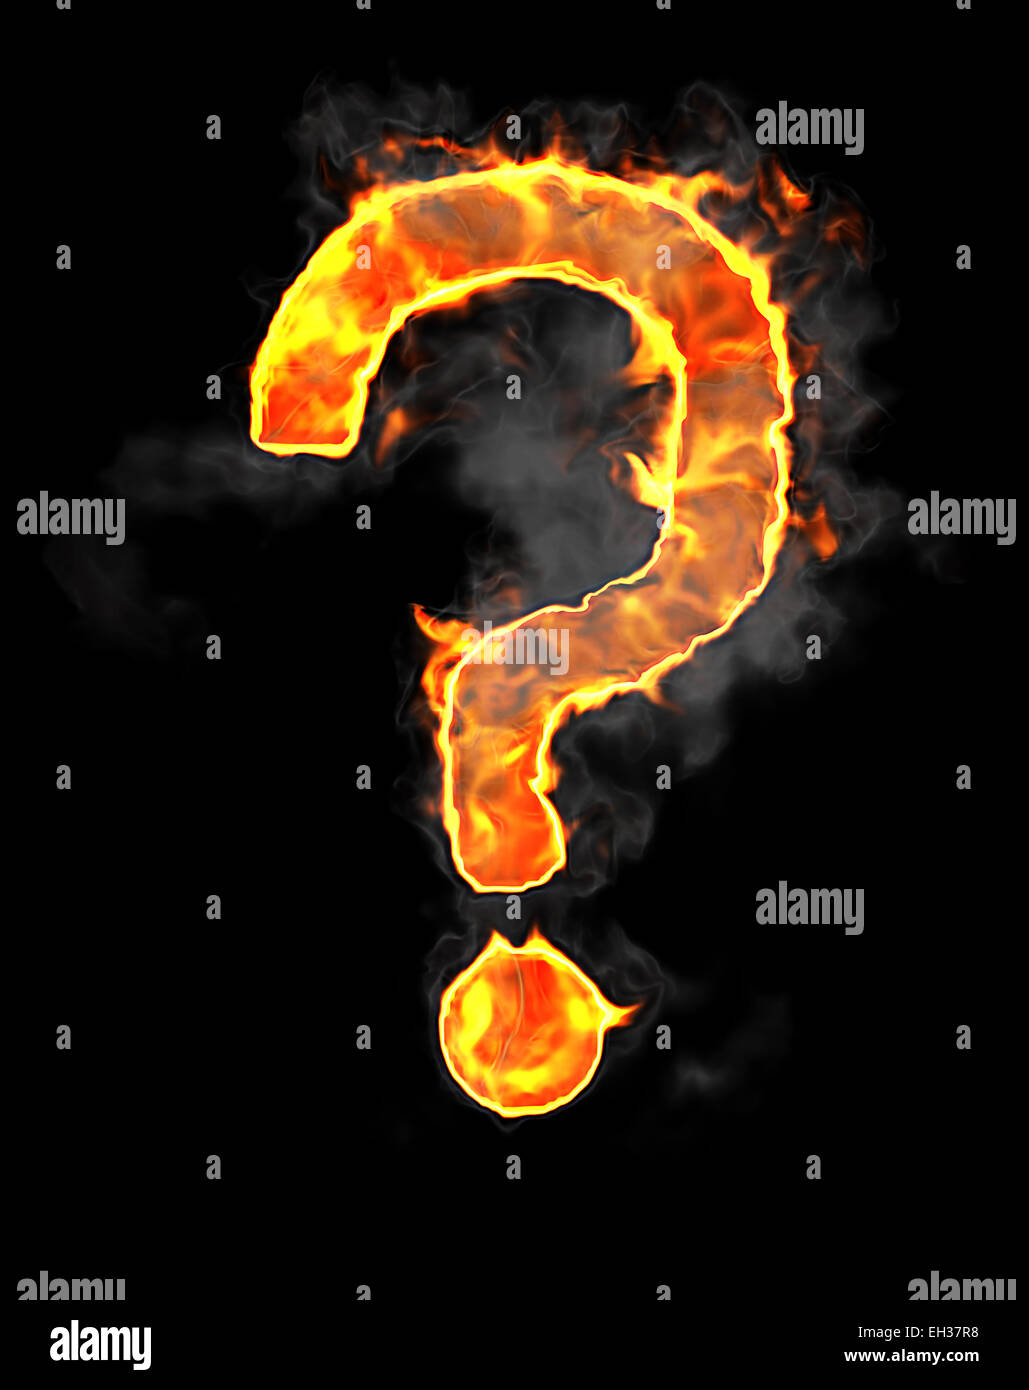 Burning and flame font query mark over black background Stock Photo